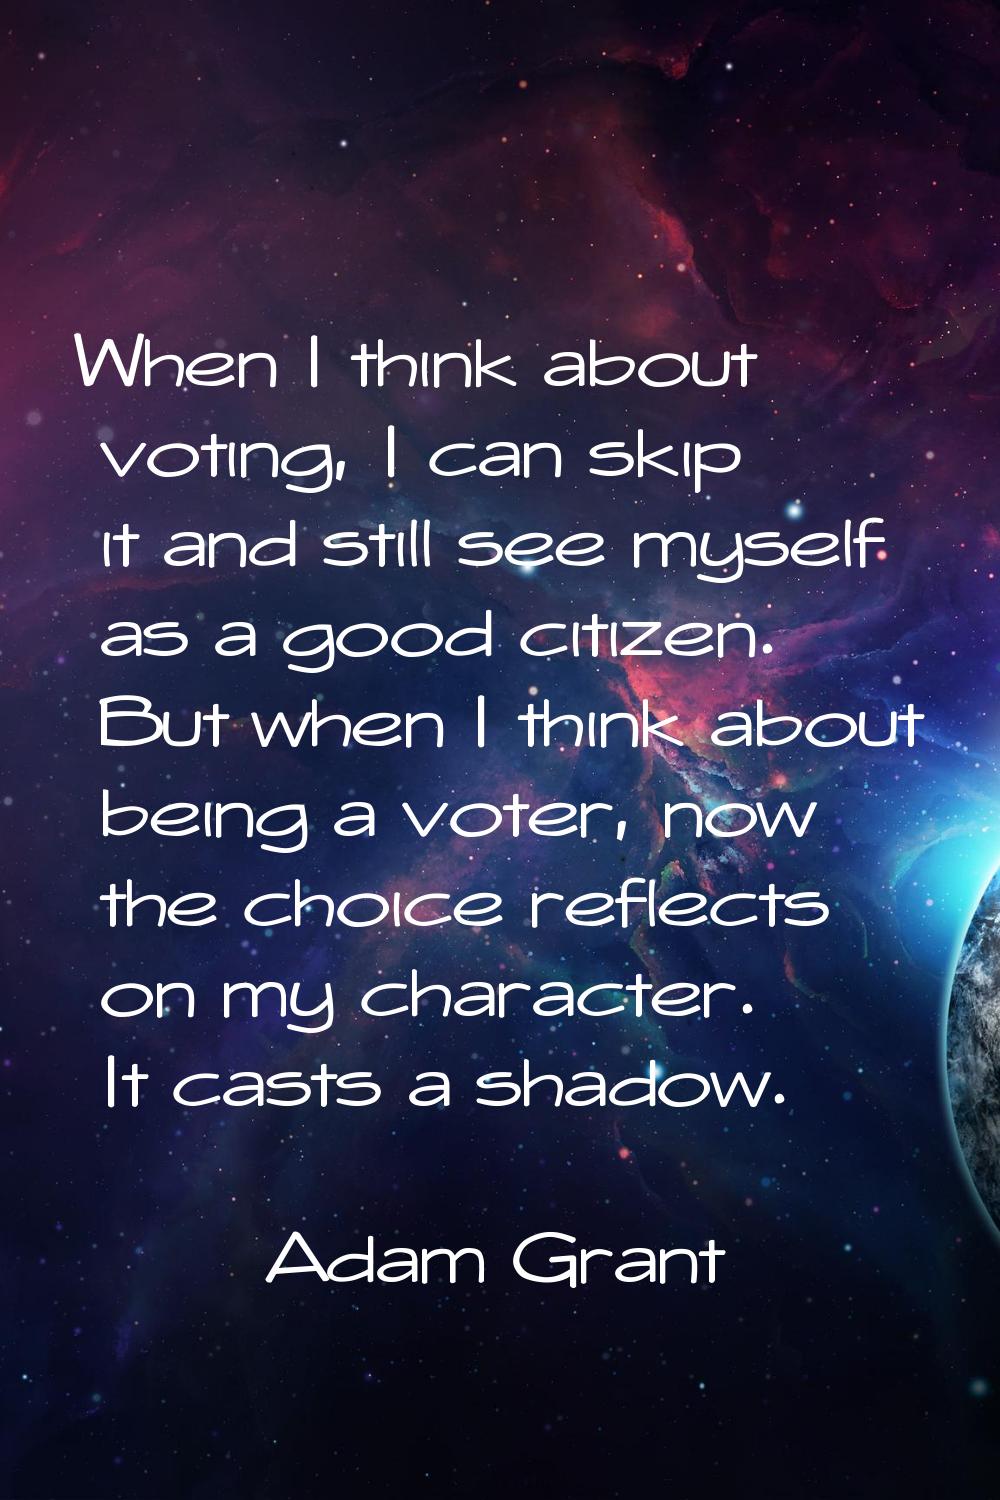 When I think about voting, I can skip it and still see myself as a good citizen. But when I think a